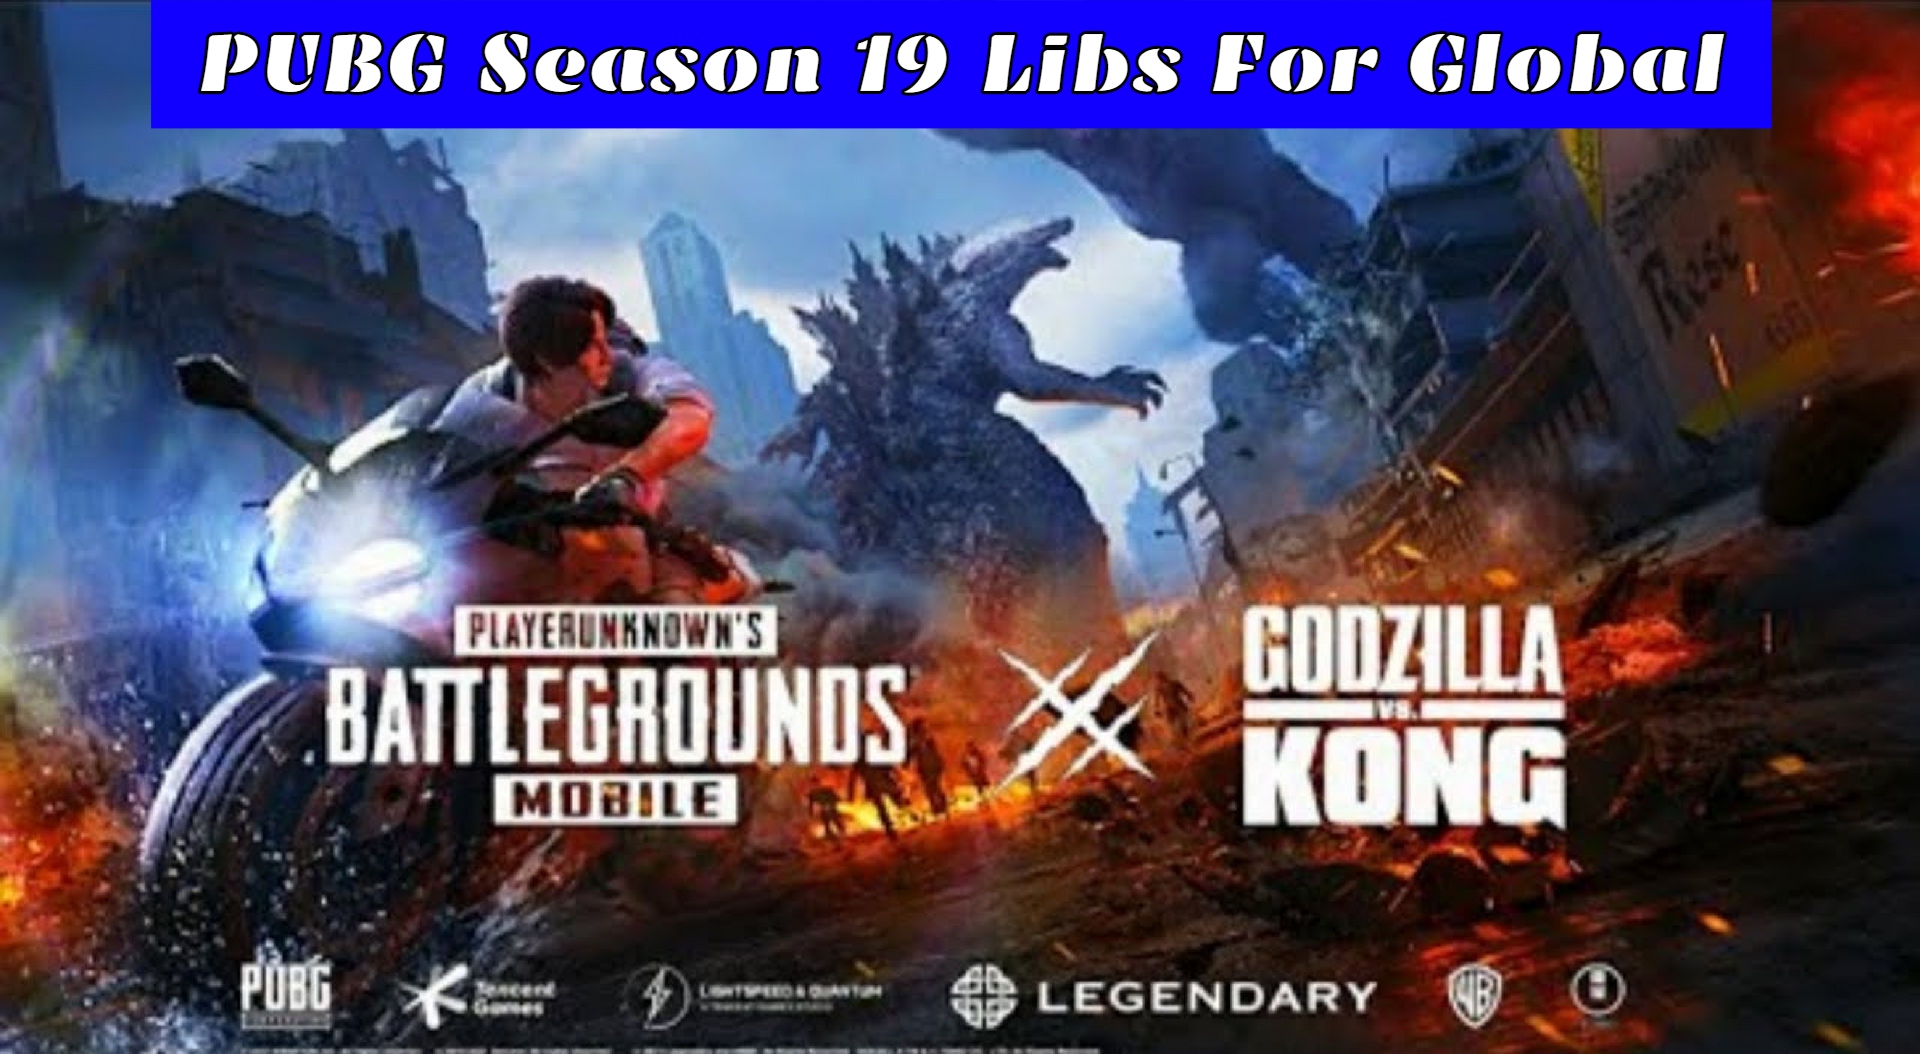 You are currently viewing PUBG Season 19 Libs For Global